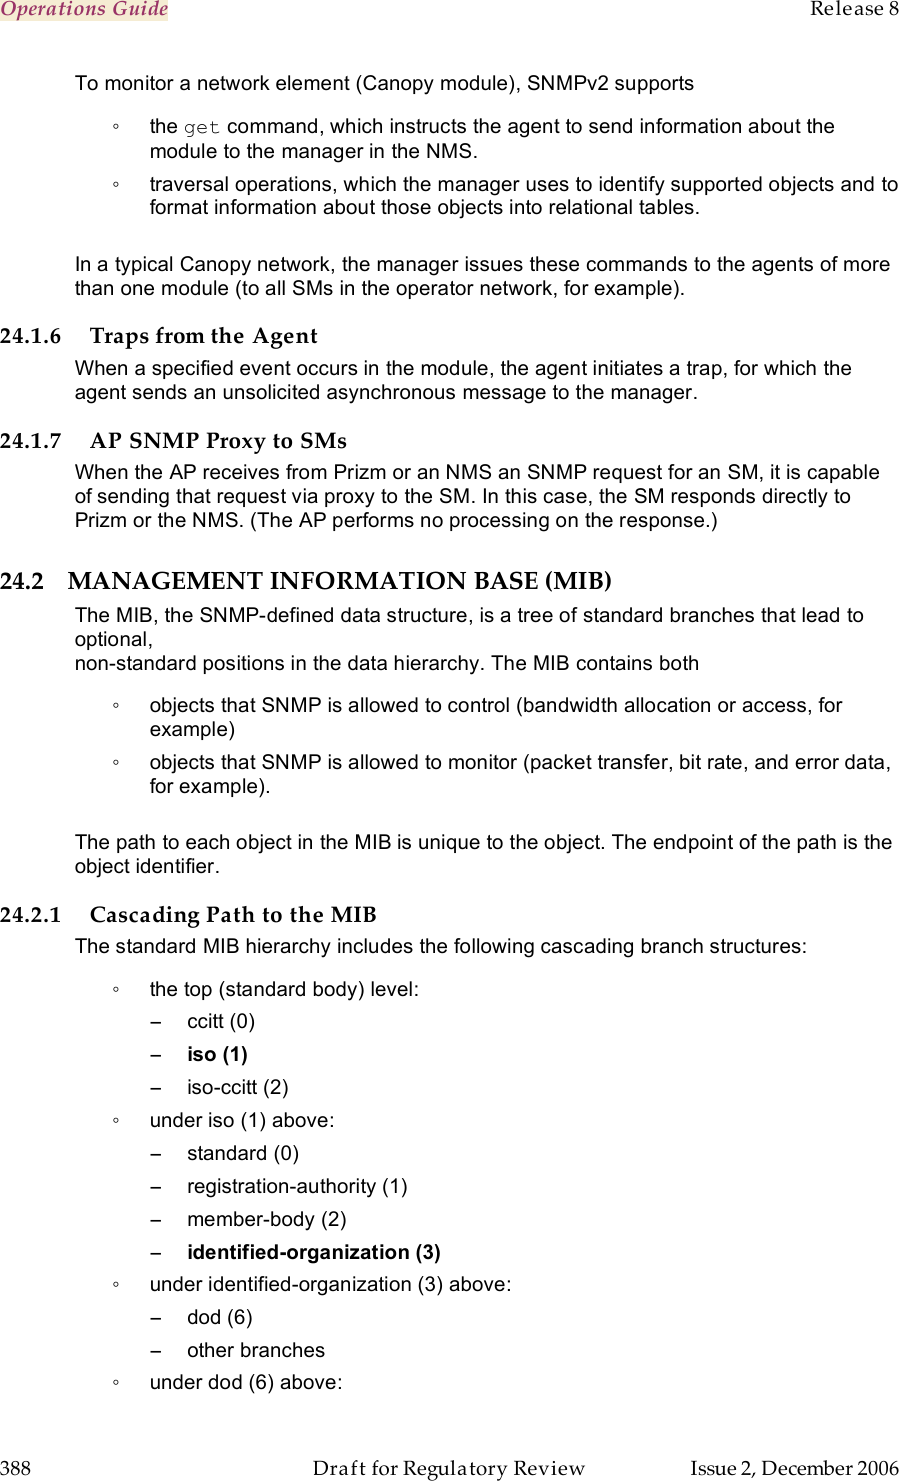 Operations Guide    Release 8   388  Draft for Regulatory Review  Issue 2, December 2006 To monitor a network element (Canopy module), SNMPv2 supports  ◦  the get command, which instructs the agent to send information about the module to the manager in the NMS. ◦  traversal operations, which the manager uses to identify supported objects and to format information about those objects into relational tables.  In a typical Canopy network, the manager issues these commands to the agents of more than one module (to all SMs in the operator network, for example). 24.1.6 Traps from the Agent When a specified event occurs in the module, the agent initiates a trap, for which the agent sends an unsolicited asynchronous message to the manager. 24.1.7 AP SNMP Proxy to SMs When the AP receives from Prizm or an NMS an SNMP request for an SM, it is capable of sending that request via proxy to the SM. In this case, the SM responds directly to Prizm or the NMS. (The AP performs no processing on the response.) 24.2 MANAGEMENT INFORMATION BASE (MIB) The MIB, the SNMP-defined data structure, is a tree of standard branches that lead to optional,  non-standard positions in the data hierarchy. The MIB contains both  ◦  objects that SNMP is allowed to control (bandwidth allocation or access, for example)  ◦  objects that SNMP is allowed to monitor (packet transfer, bit rate, and error data, for example).   The path to each object in the MIB is unique to the object. The endpoint of the path is the object identifier. 24.2.1 Cascading Path to the MIB The standard MIB hierarchy includes the following cascading branch structures: ◦  the top (standard body) level: −  ccitt (0) − iso (1) −  iso-ccitt (2) ◦  under iso (1) above: −  standard (0) −  registration-authority (1) −  member-body (2) − identified-organization (3) ◦  under identified-organization (3) above: −  dod (6) −  other branches ◦  under dod (6) above: 